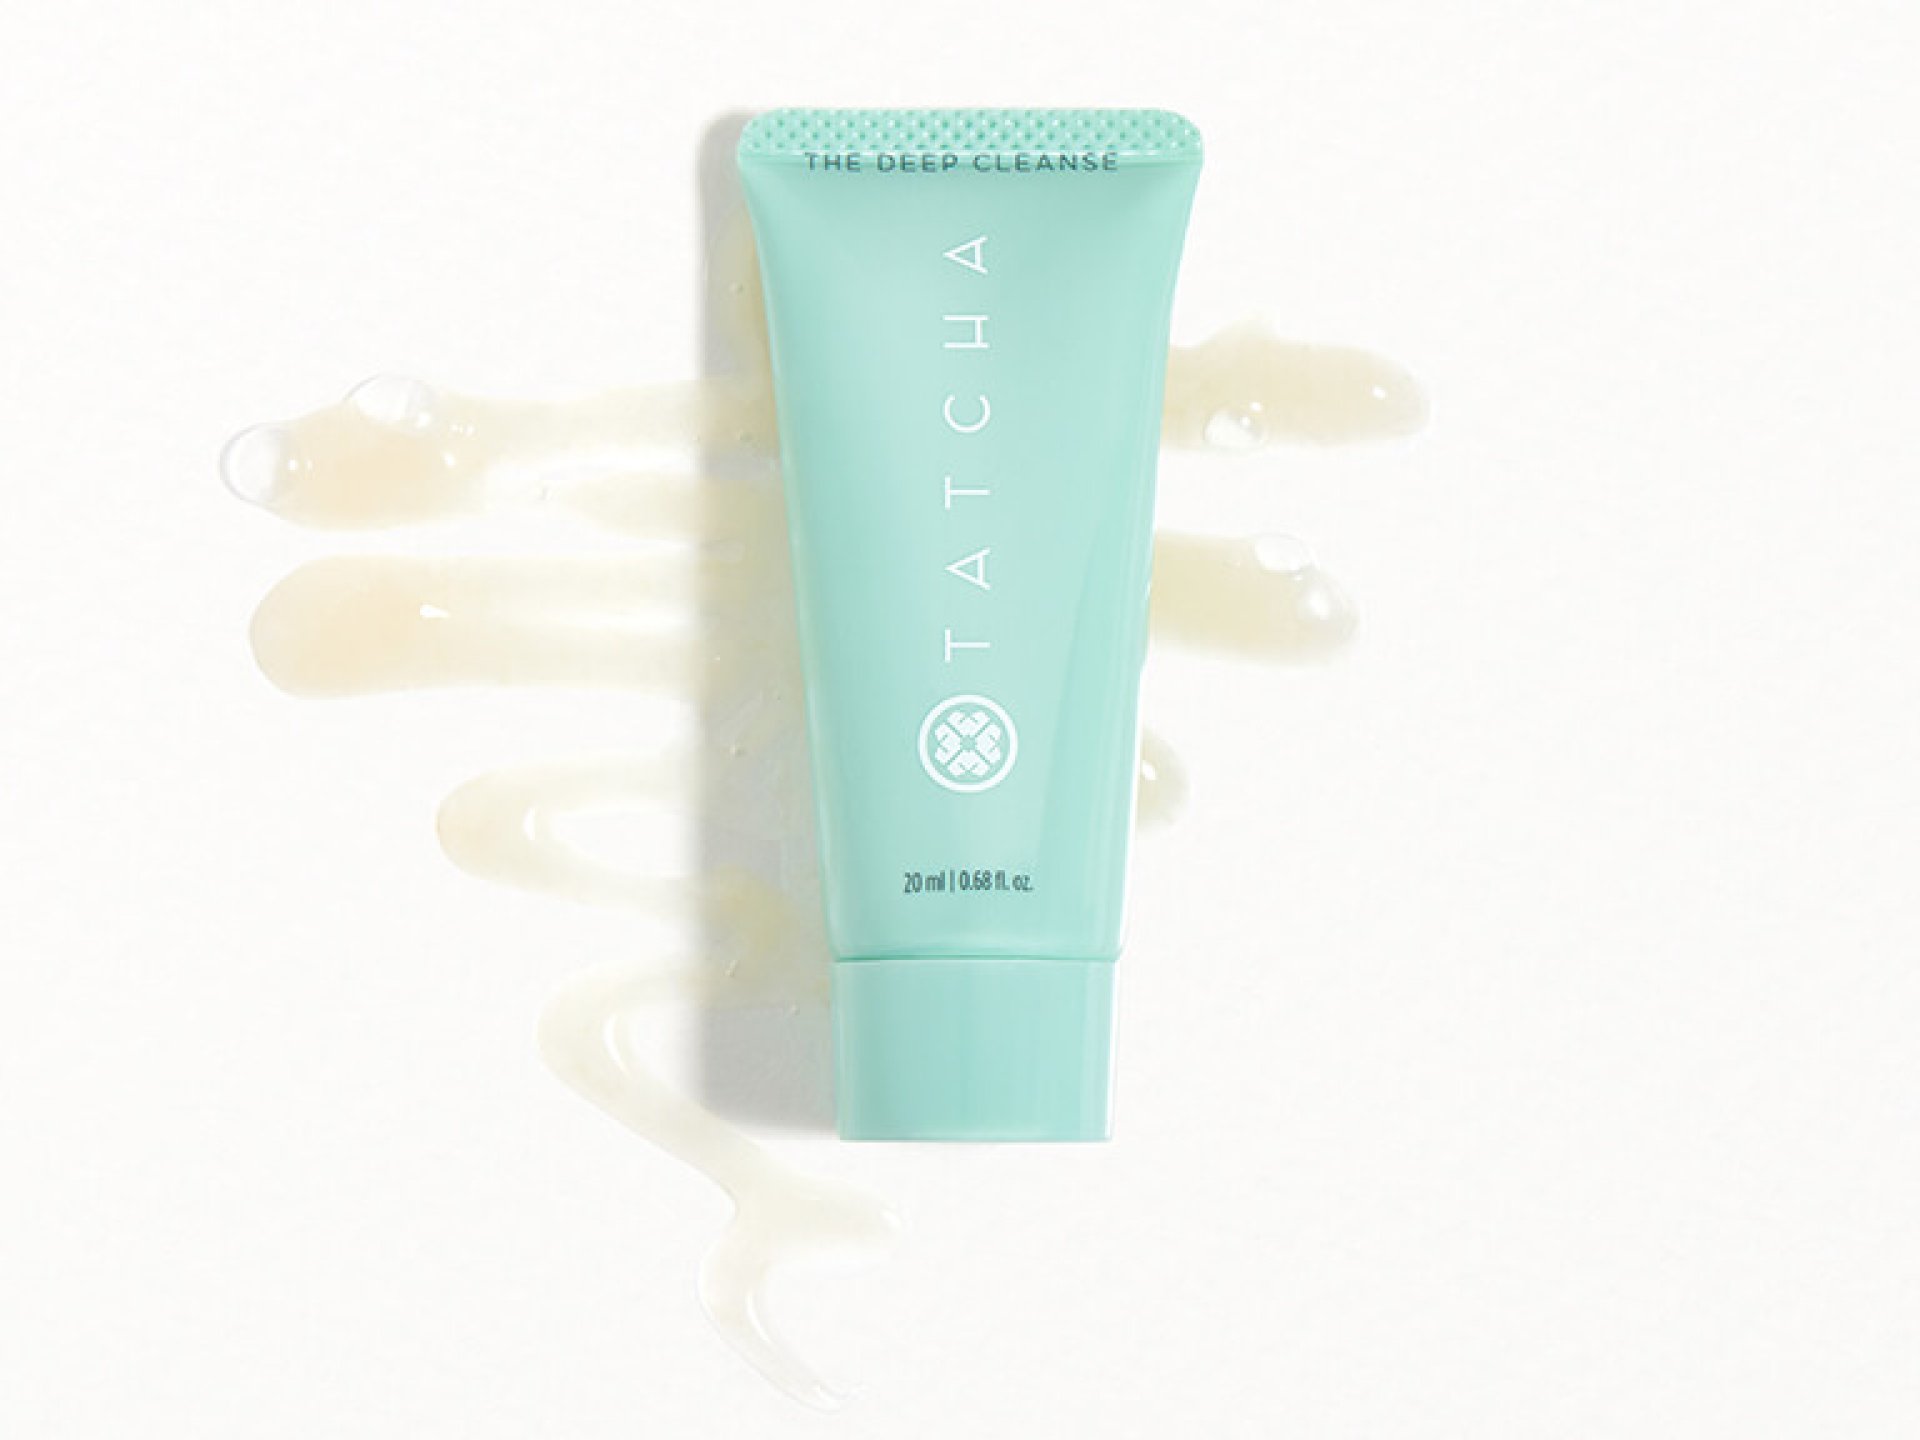 TATCHA The Deep Cleanse Gentle Exfoliating Cleanser